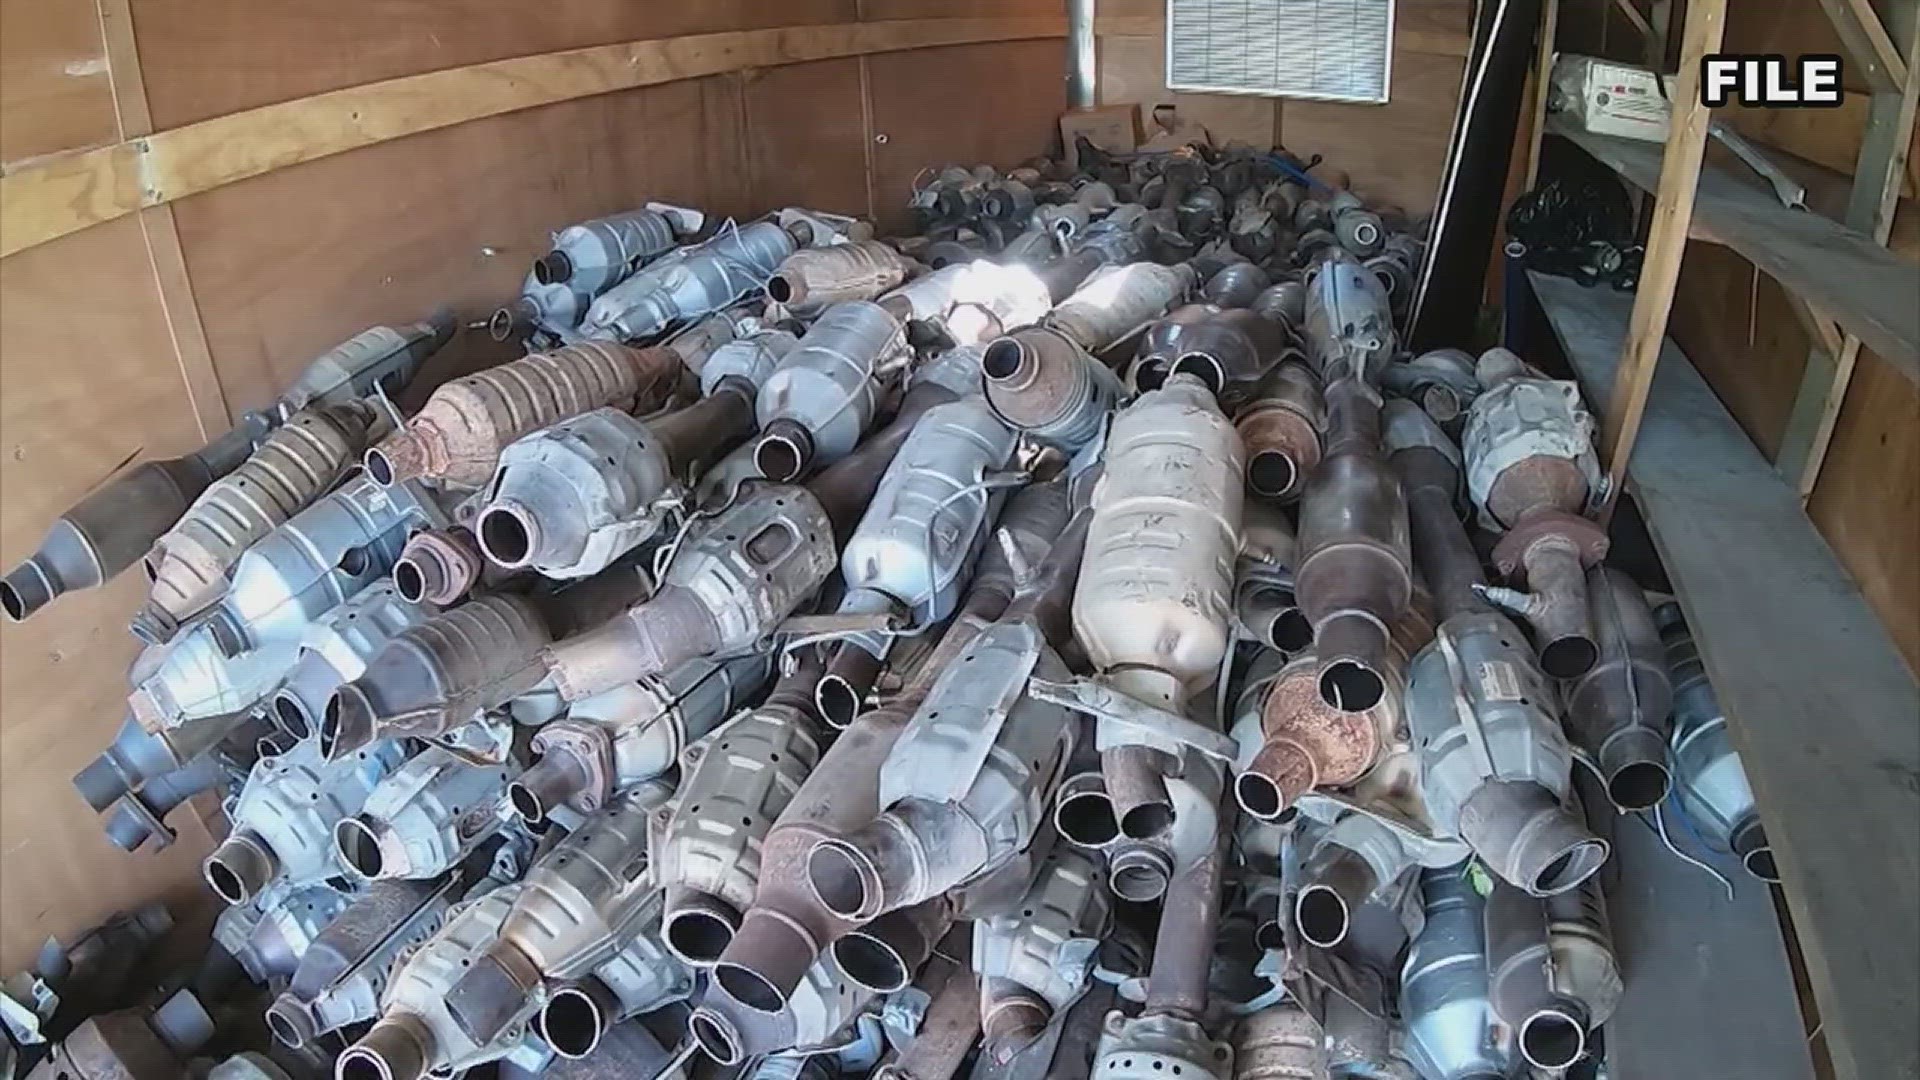 The bill creates new criminal penalties for catalytic converter thefts and gives prosecutors the flexibility to treat the thefts as organized crime.